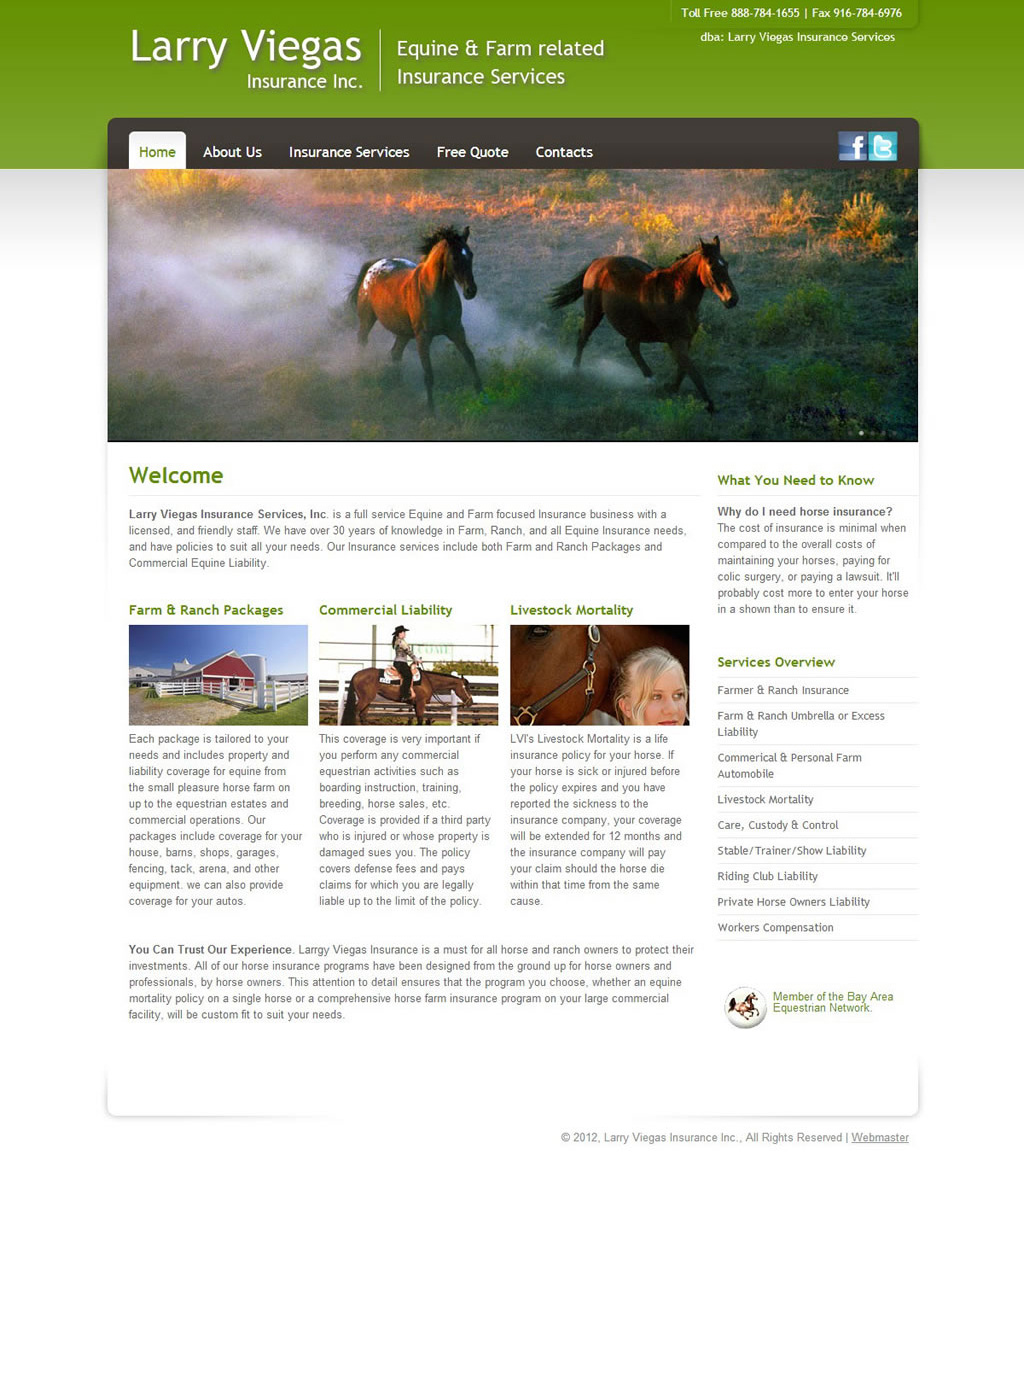 Home page for Larry Viegas Insurance, Inc.